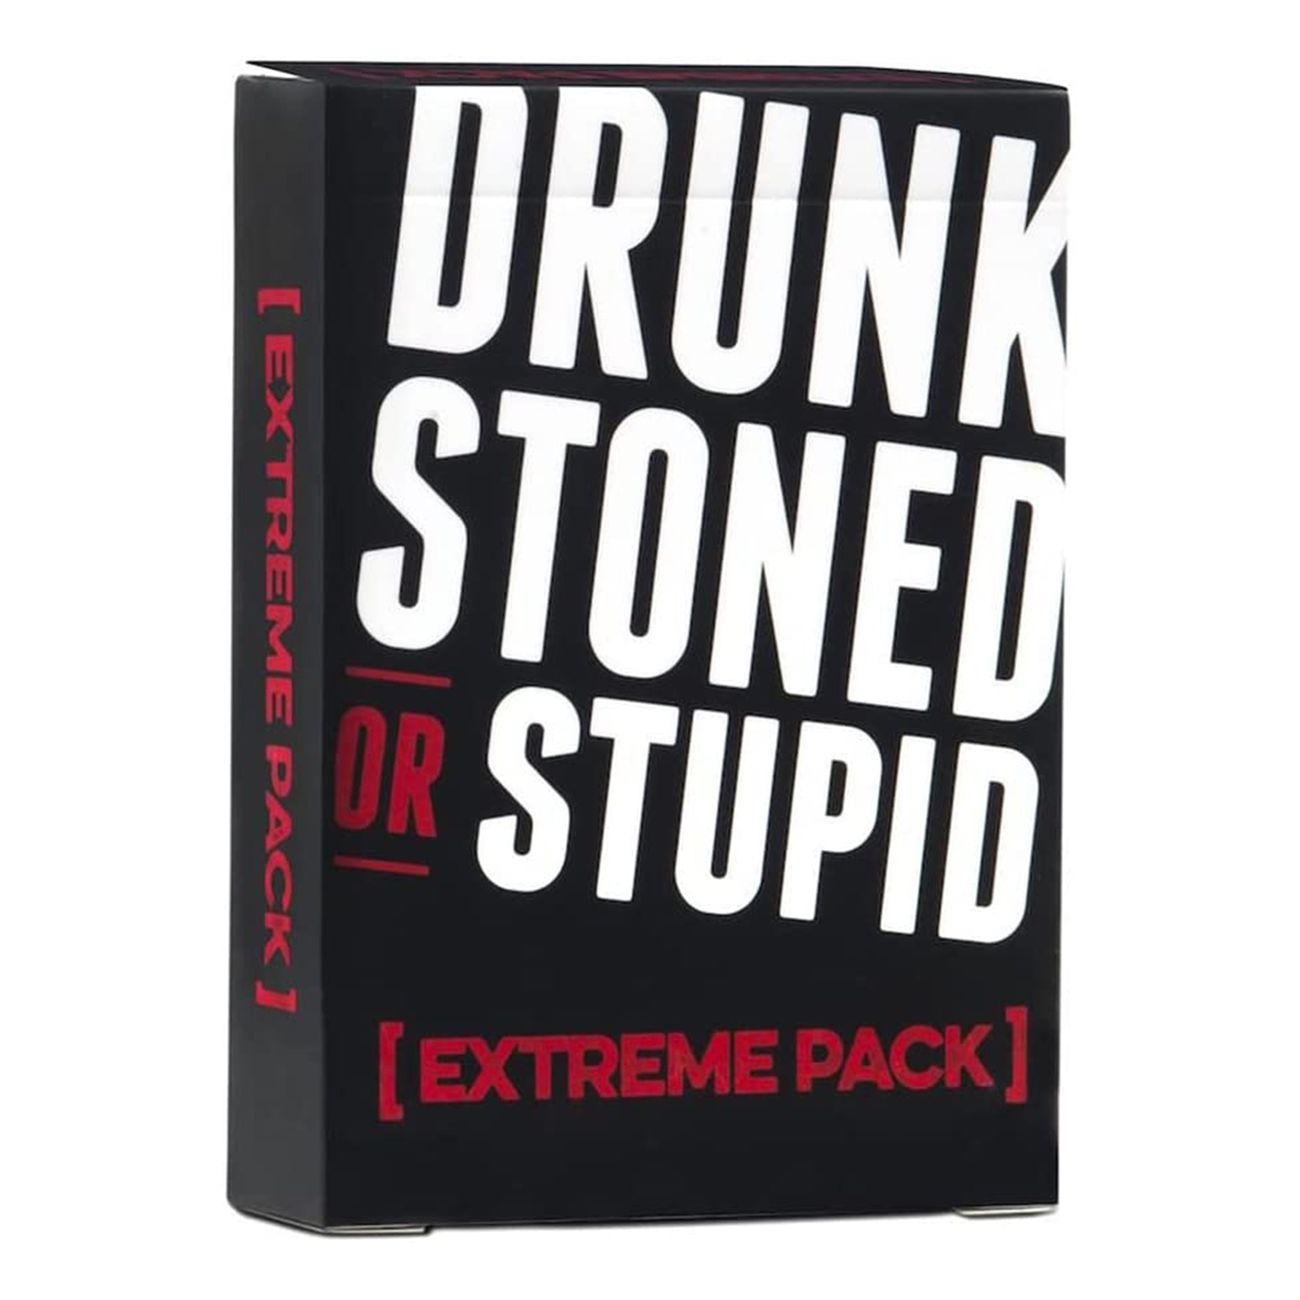 drunk-stoned-or-stupid-extreme-pack-98728-1